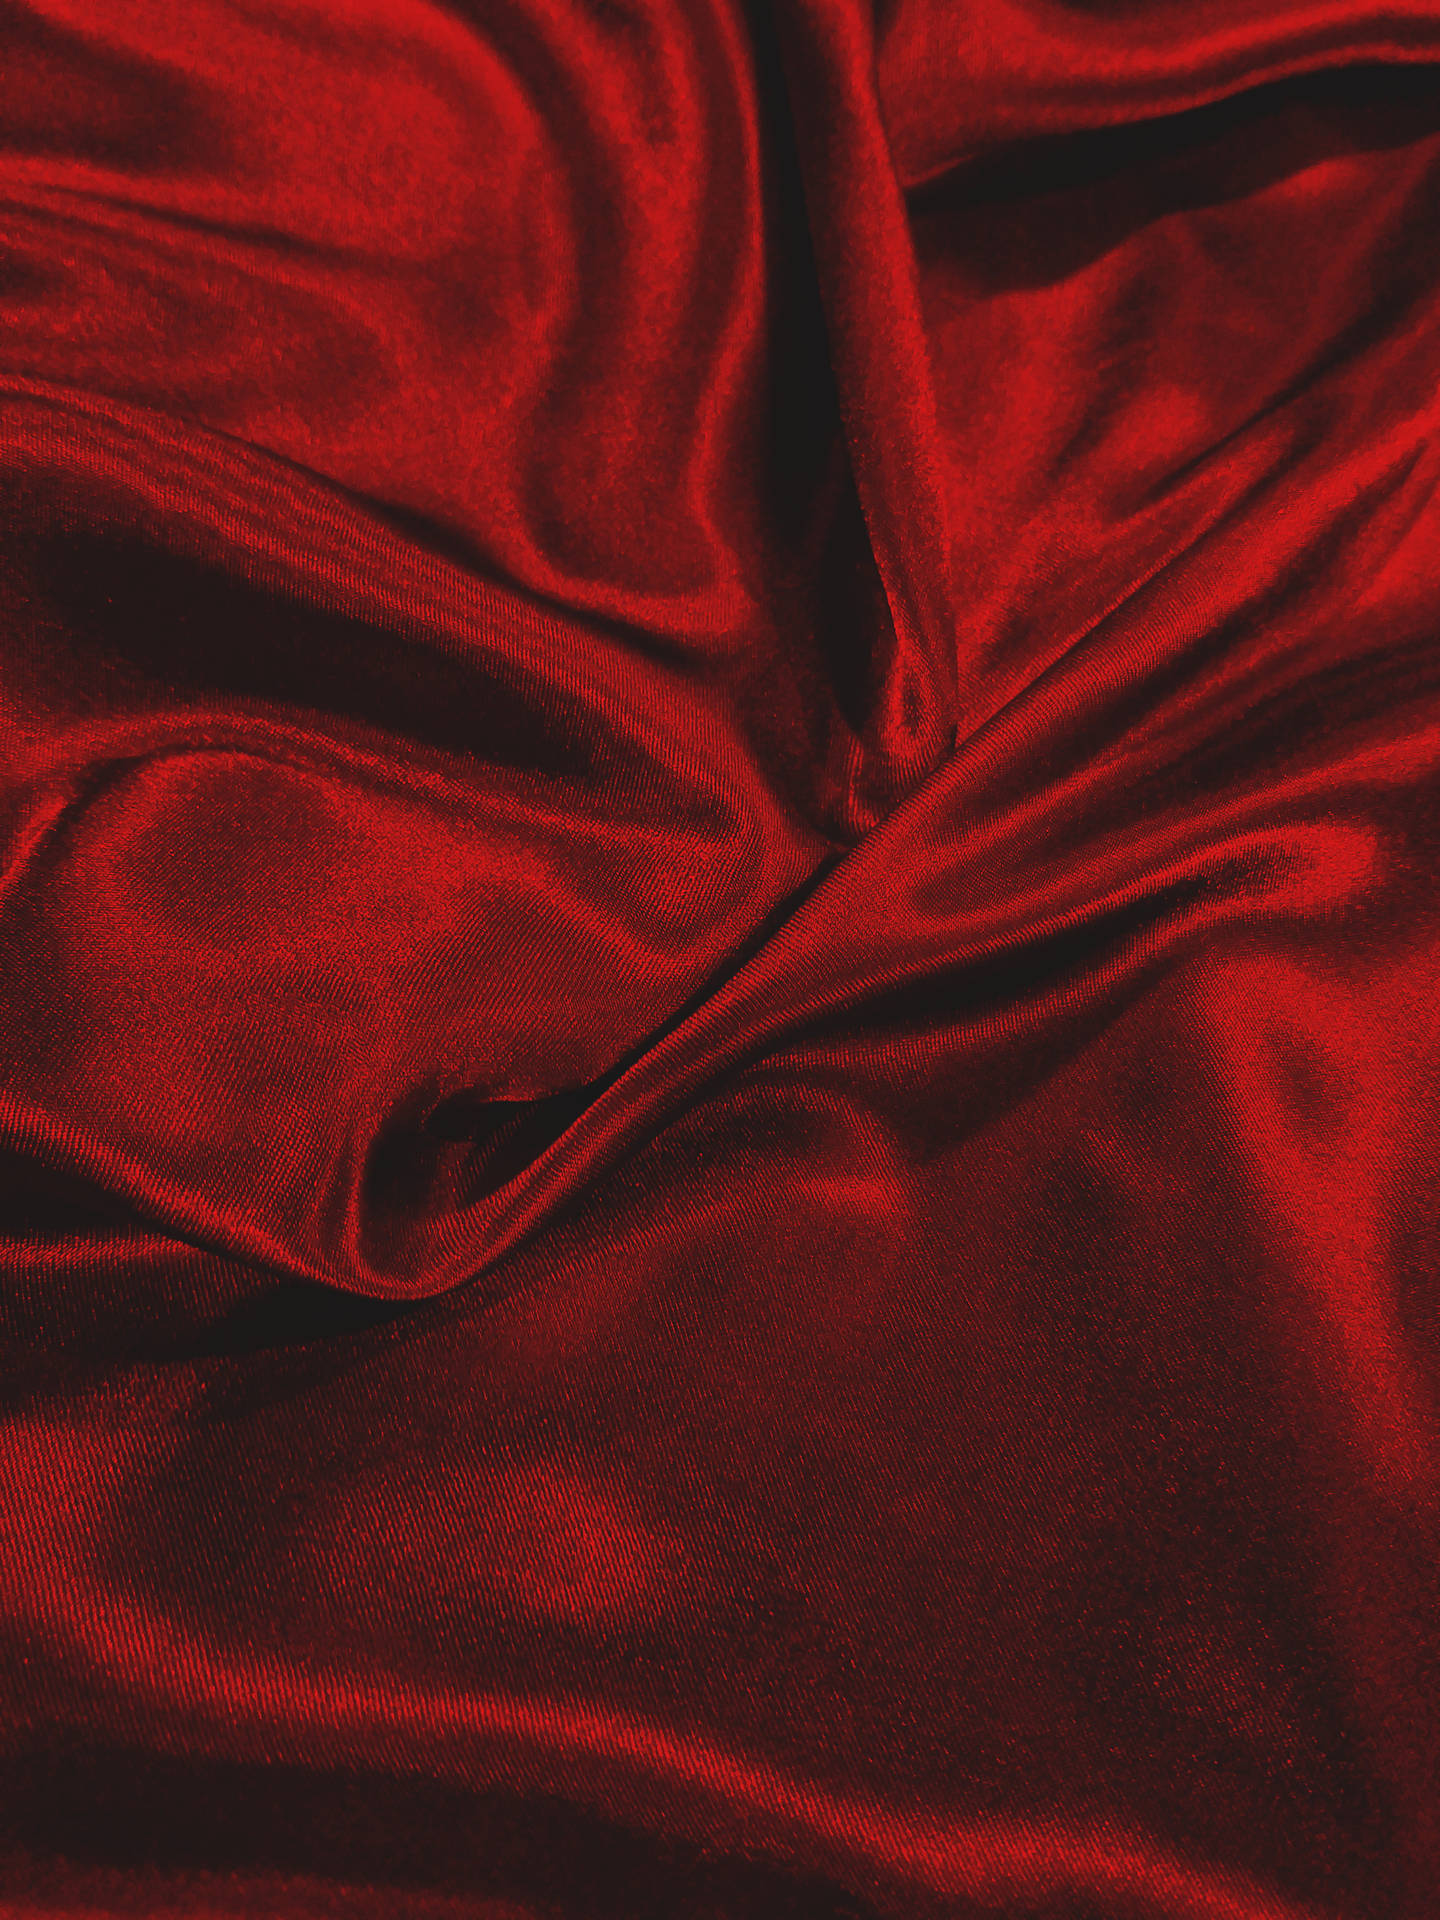 Red Soft Satin Cloth Background